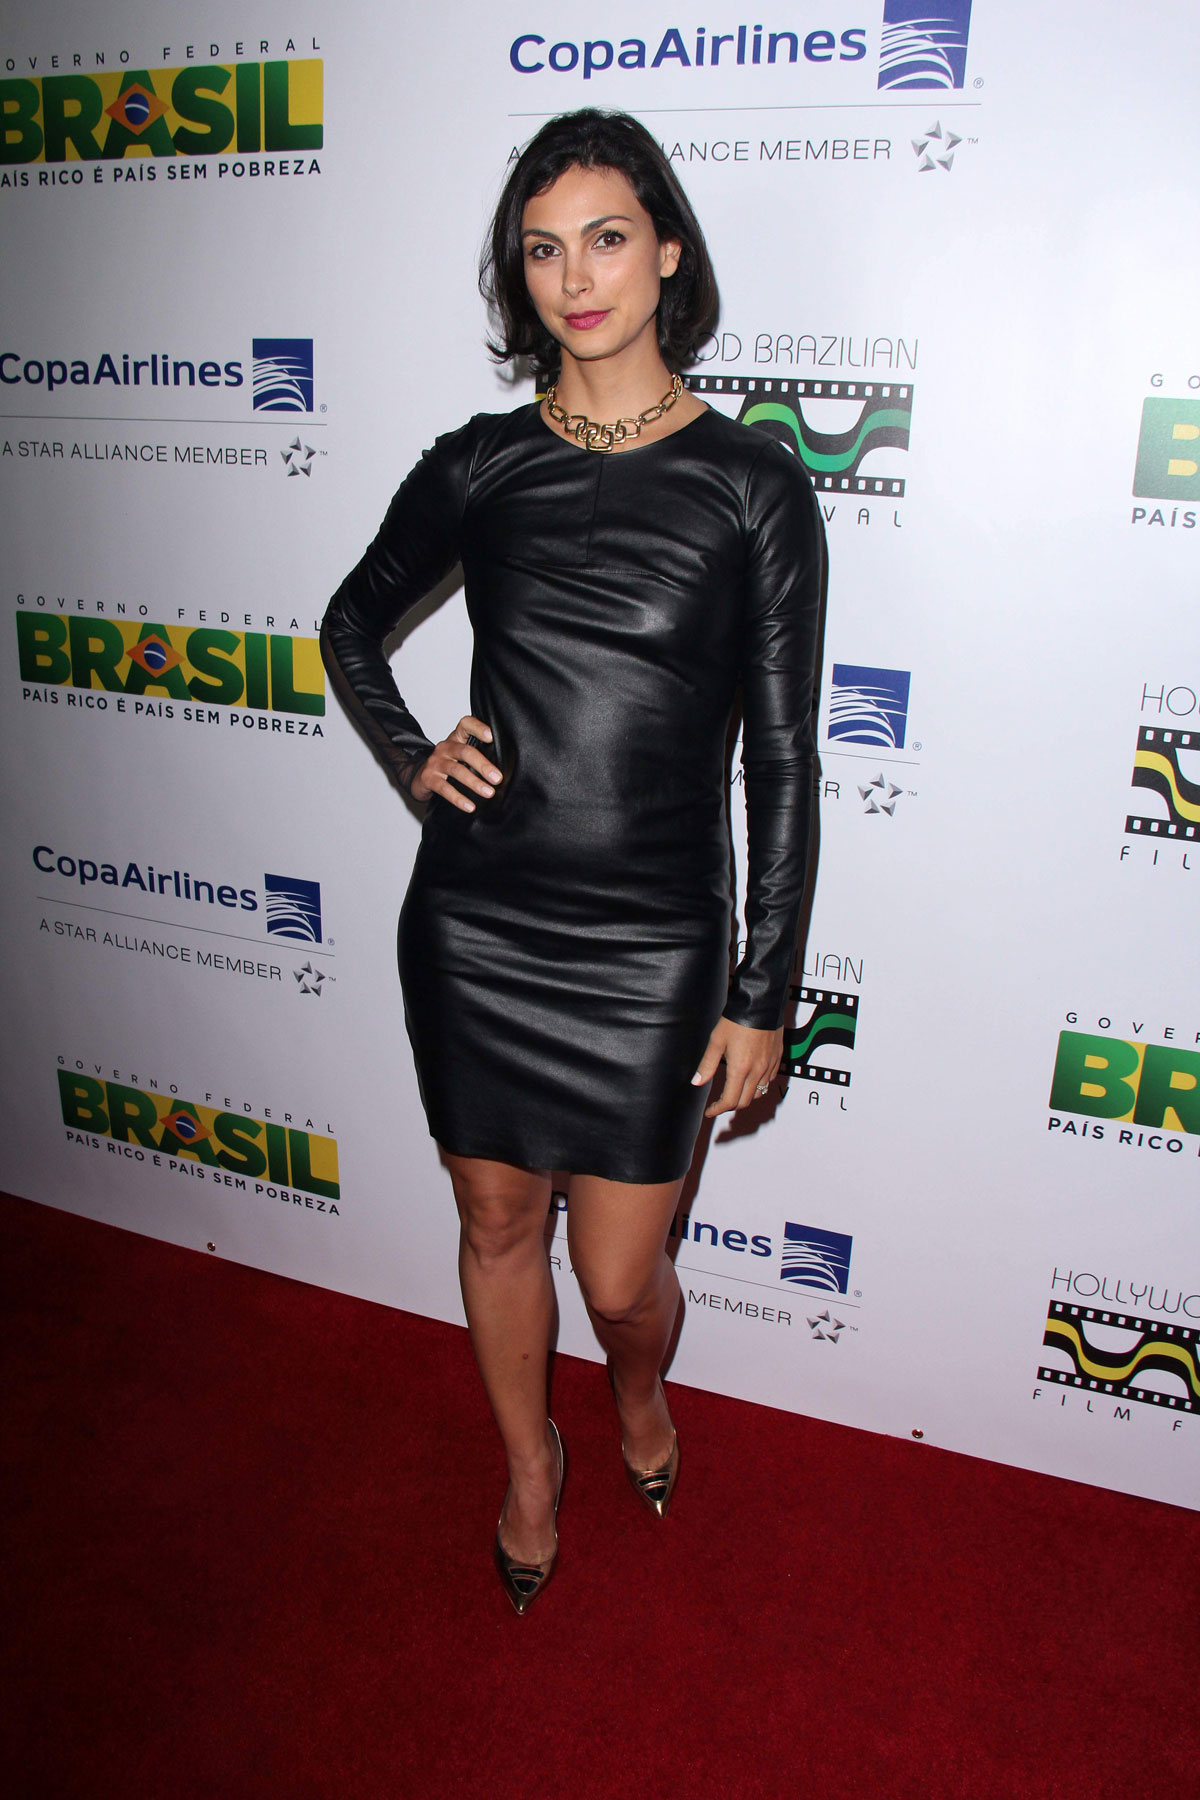 Morena Baccarin attends 6th Annual Hollywood Brazilian Film Festival opening night gala